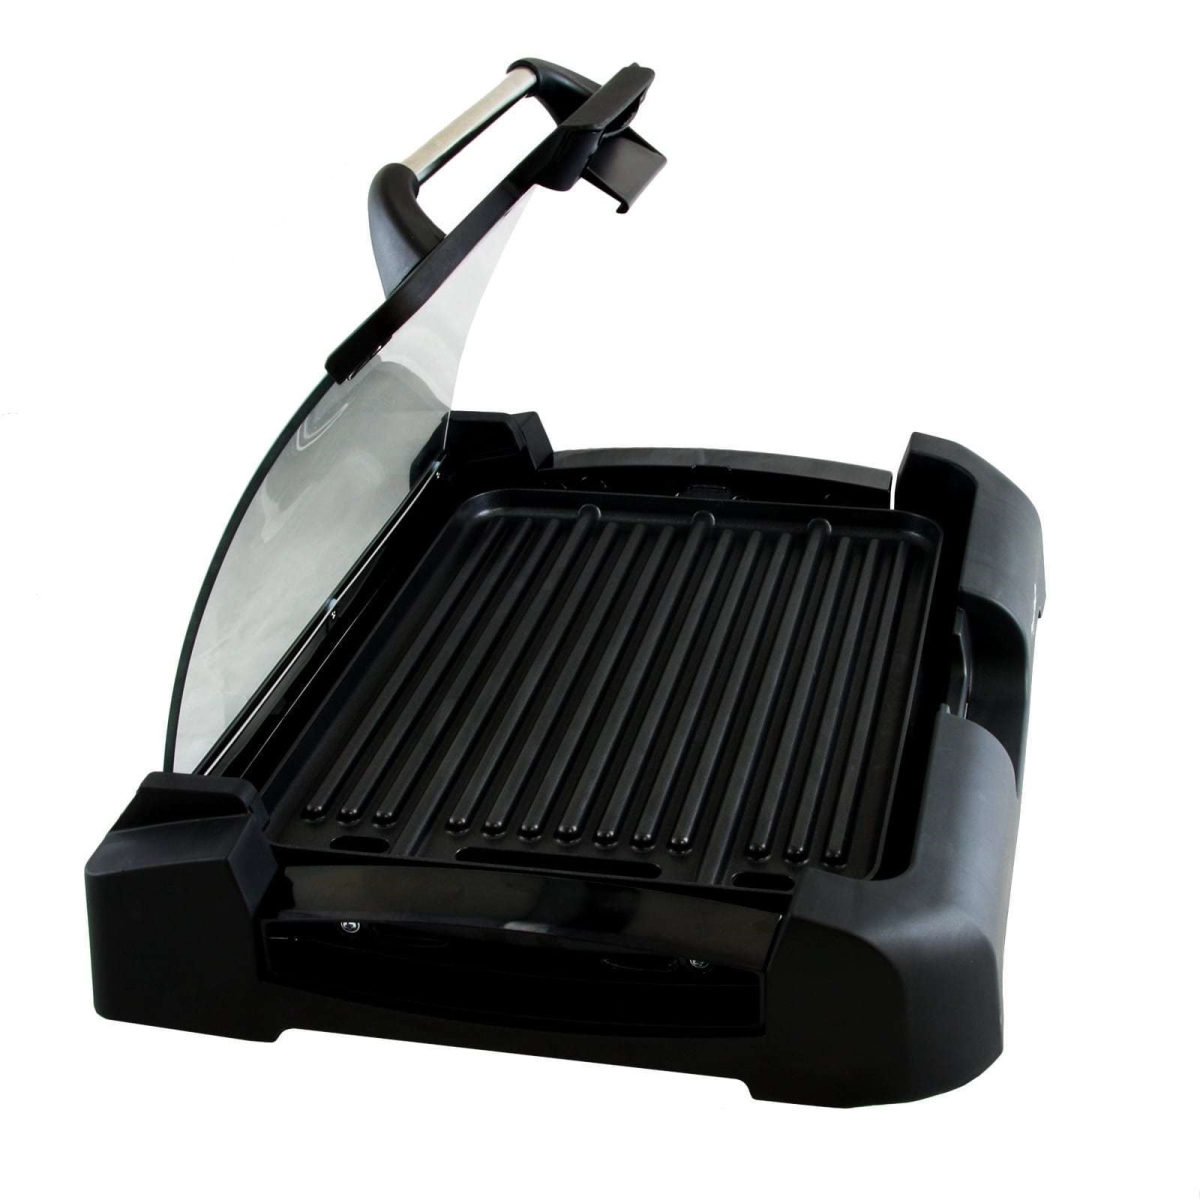 Mcg-106 Reversible Indoor Grill And Griddle With Removable Glass Lid